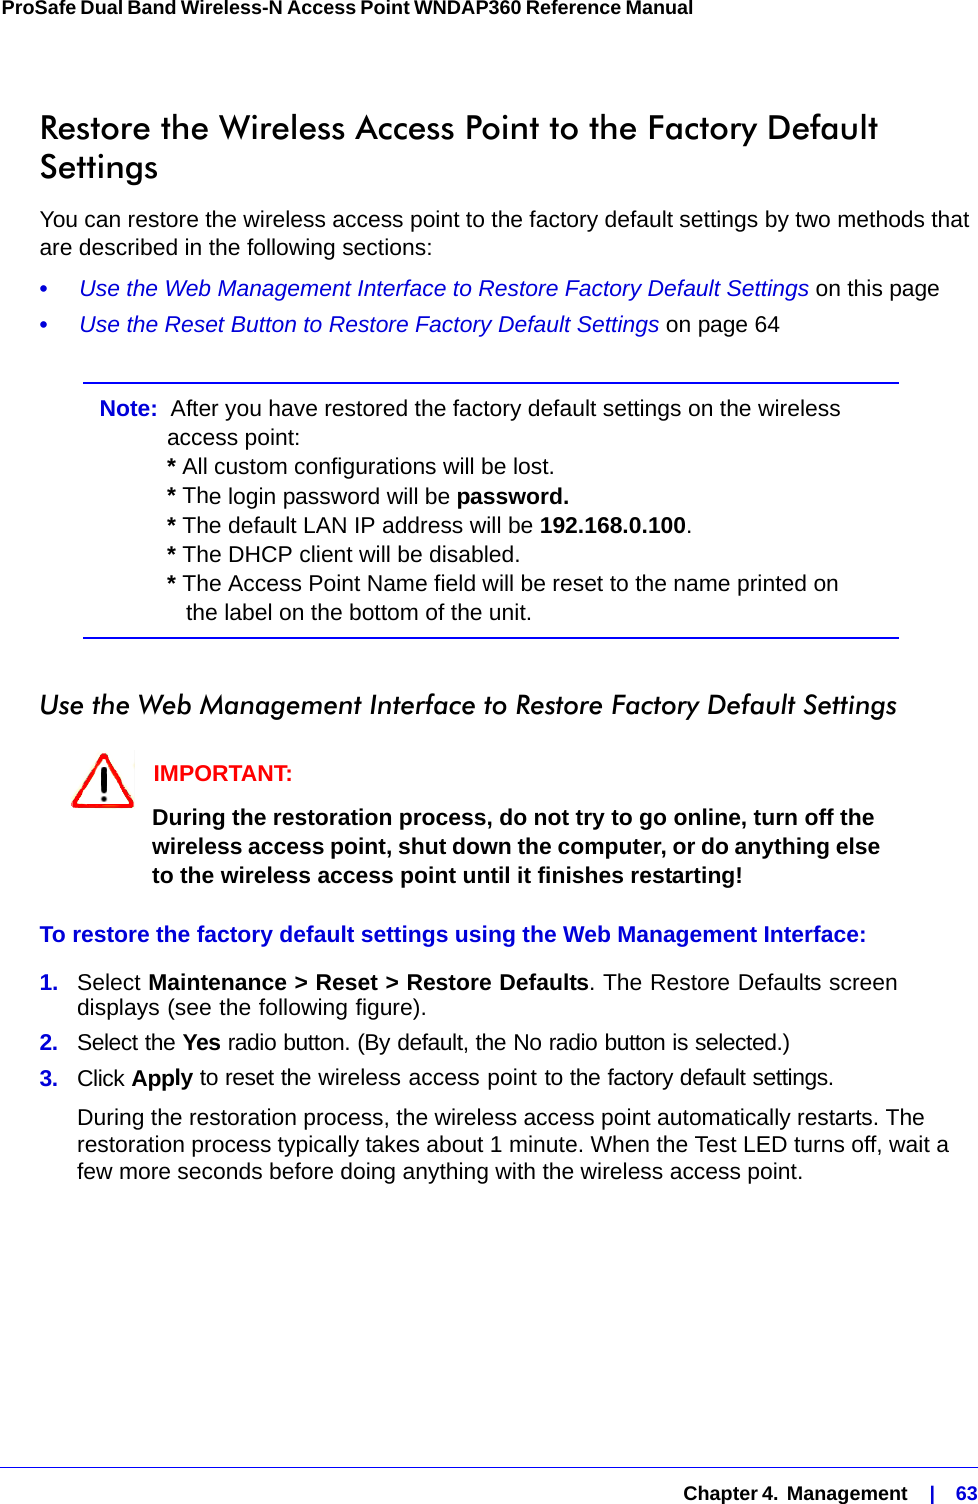   Chapter 4.  Management    |    63ProSafe Dual Band Wireless-N Access Point WNDAP360 Reference Manual Restore the Wireless Access Point to the Factory Default SettingsYou can restore the wireless access point to the factory default settings by two methods that are described in the following sections:•     Use the Web Management Interface to Restore Factory Default Settings on this page•     Use the Reset Button to Restore Factory Default Settings on page 64Note:  After you have restored the factory default settings on the wireless access point: * All custom configurations will be lost. * The login password will be password. * The default LAN IP address will be 192.168.0.100.  * The DHCP client will be disabled. * The Access Point Name field will be reset to the name printed on    the label on the bottom of the unit.Use the Web Management Interface to Restore Factory Default SettingsIMPORTANT:During the restoration process, do not try to go online, turn off the wireless access point, shut down the computer, or do anything else to the wireless access point until it finishes restarting!To restore the factory default settings using the Web Management Interface:1.  Select Maintenance &gt; Reset &gt; Restore Defaults. The Restore Defaults screen displays (see the following figure).2.  Select the Yes radio button. (By default, the No radio button is selected.)3.  Click Apply to reset the wireless access point to the factory default settings. During the restoration process, the wireless access point automatically restarts. The restoration process typically takes about 1 minute. When the Test LED turns off, wait a few more seconds before doing anything with the wireless access point.